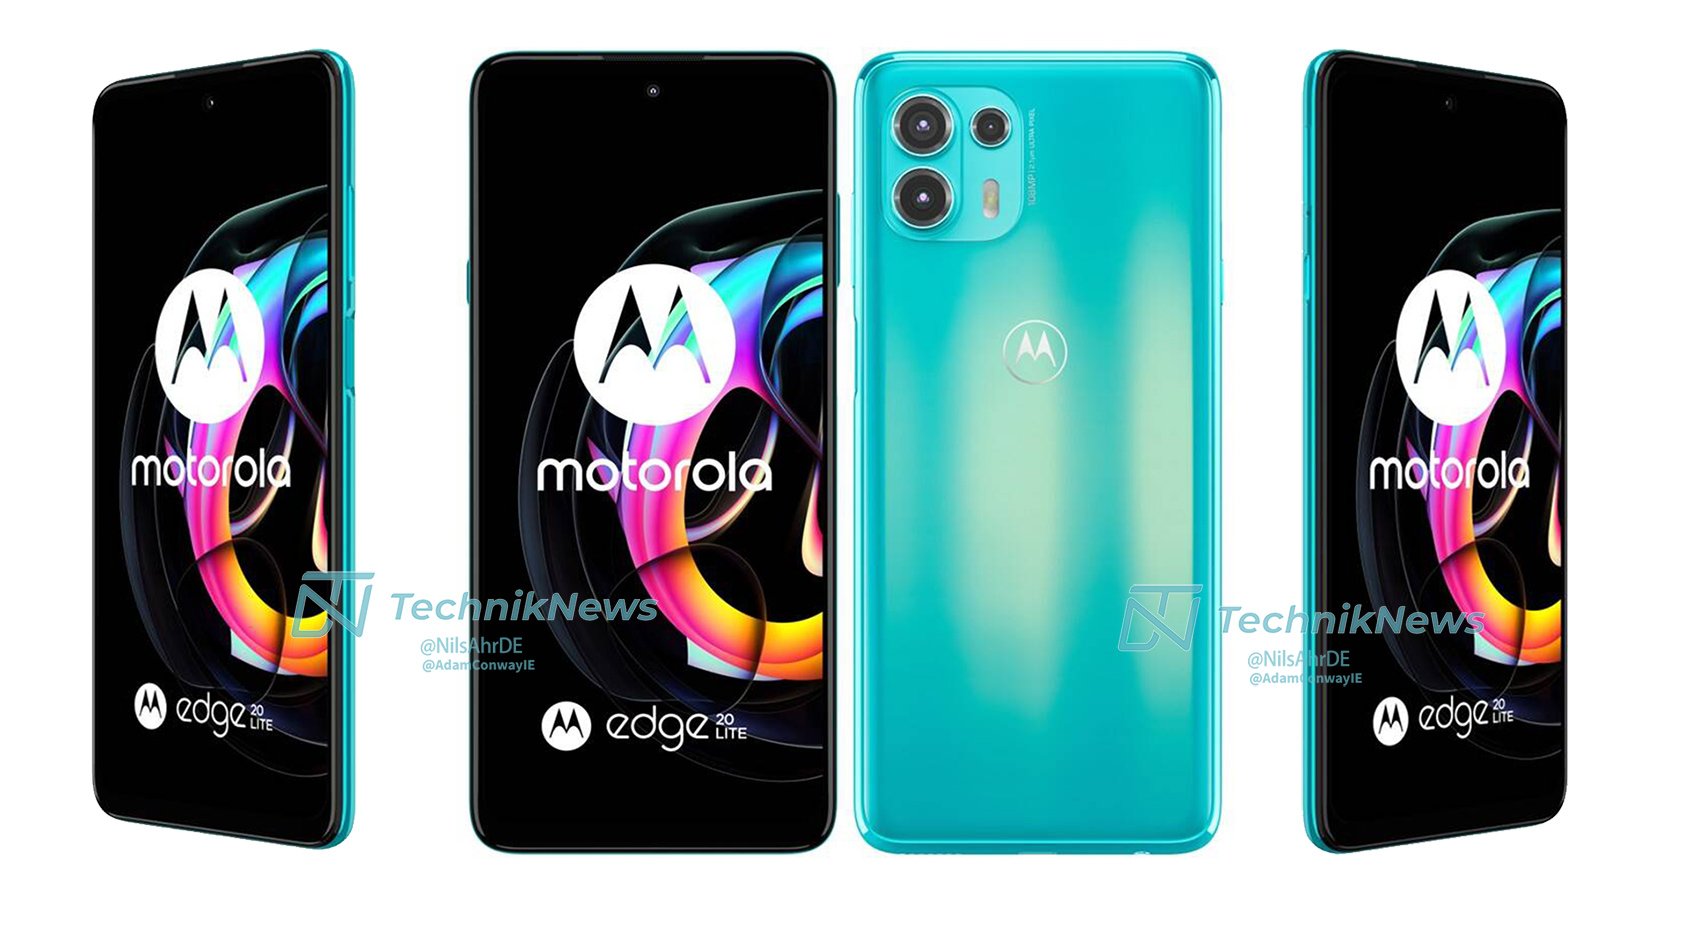 first look at the next Motorola you'll want